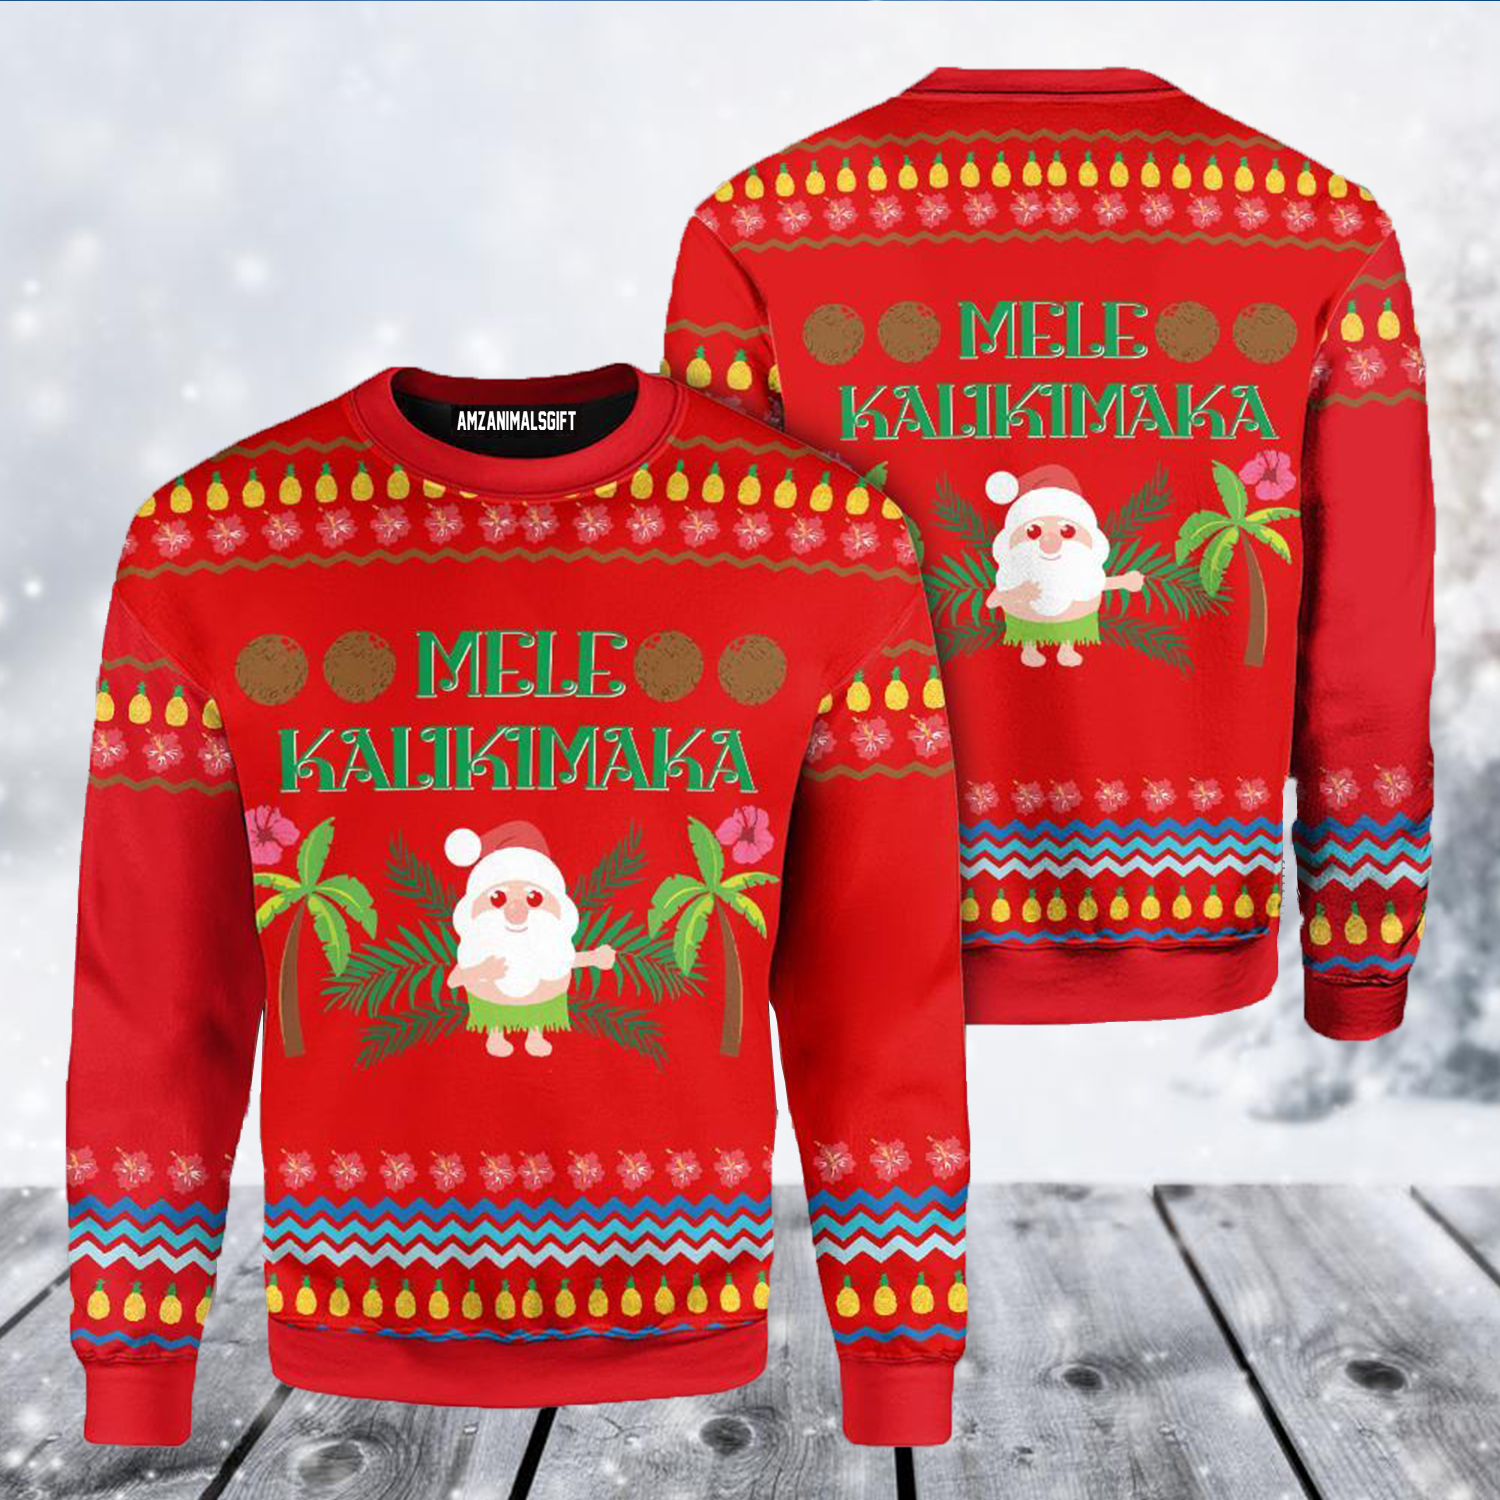 Santa Clause Christmas Ugly Sweater, Mele Kalikimaka Ugly Sweater, Cartoon Santa Clause Sweater, Perfect Gift For Christmas, Friends, Family